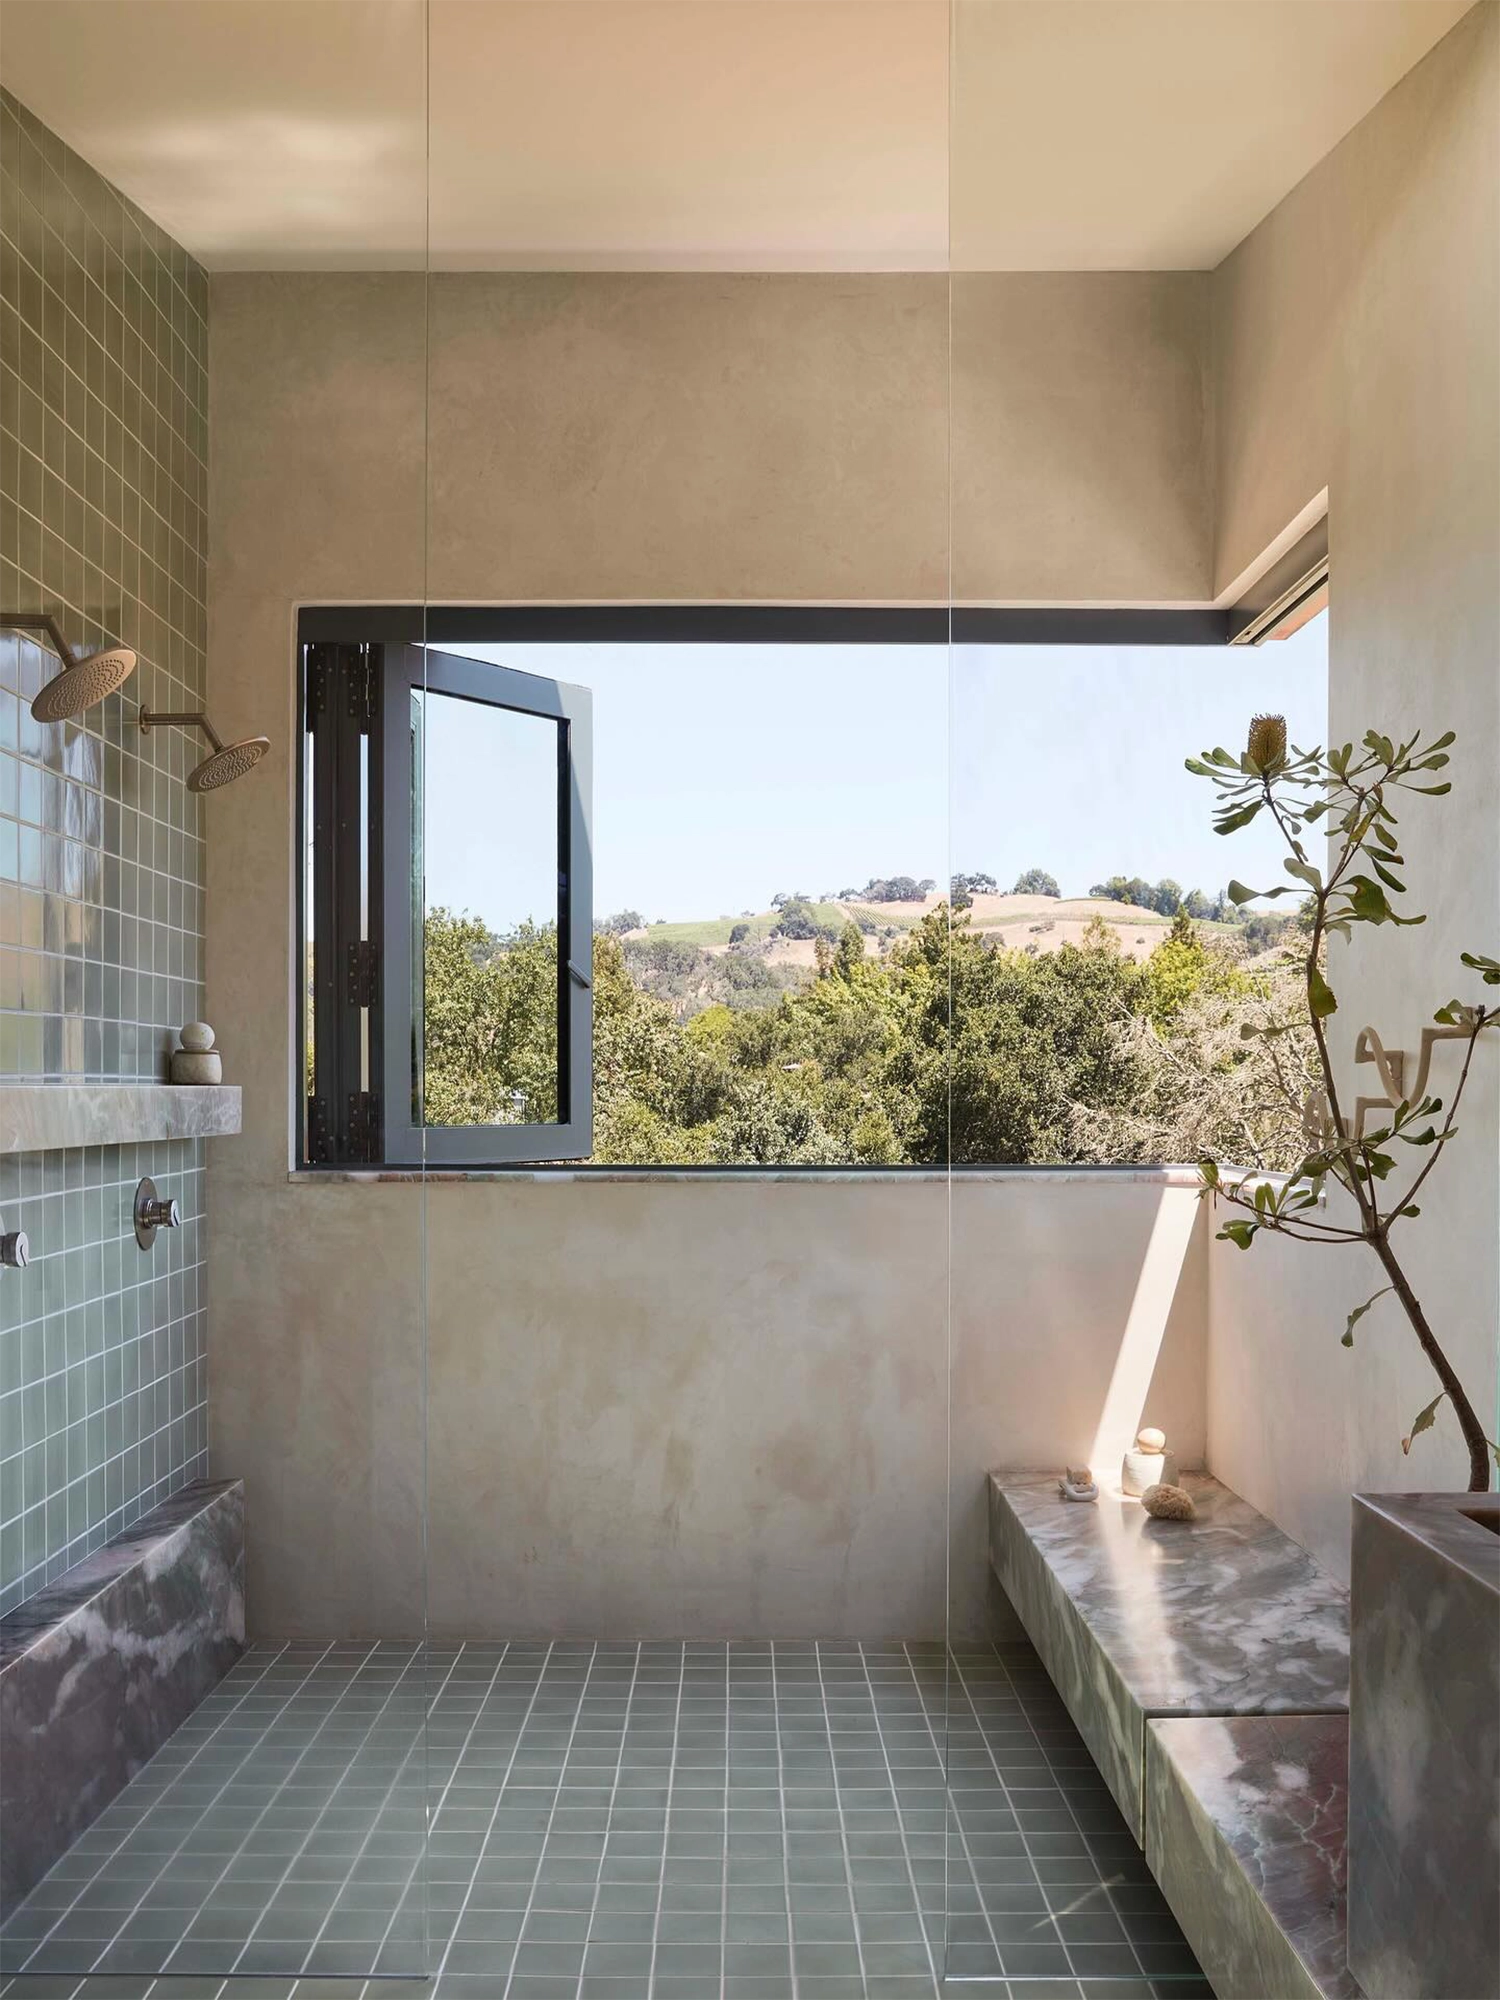 beautiful interior design accomplished with this spa shower with large window